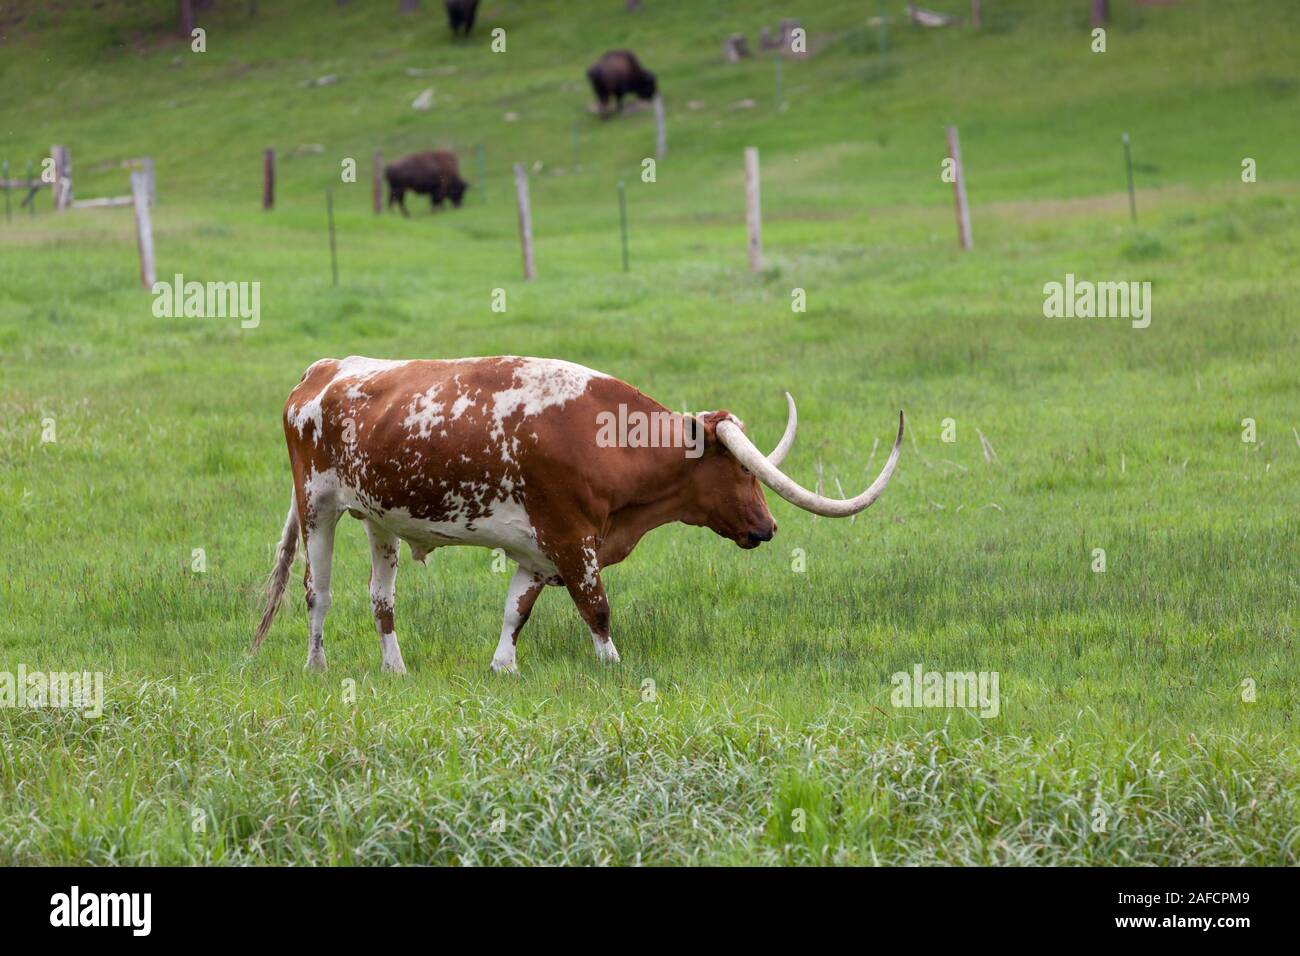 A Texas Longhorn cow walks in a green grass field with a group of bison in the background separated by a fence line. Stock Photo